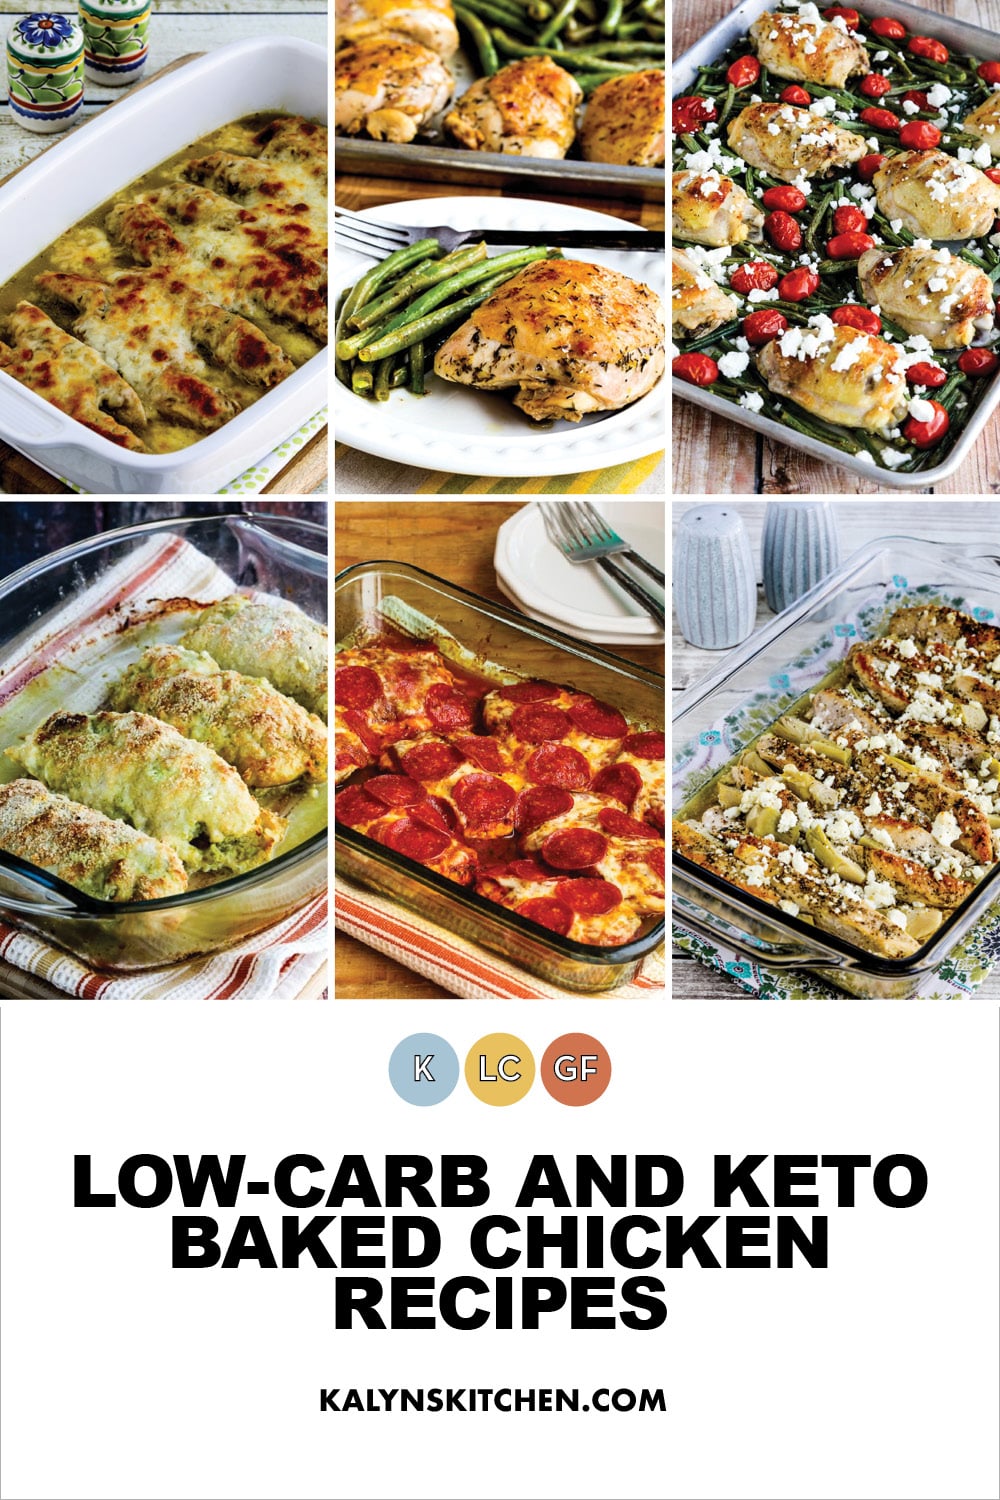 Pinterest image of Low-Carb and Keto Baked Chicken Recipes